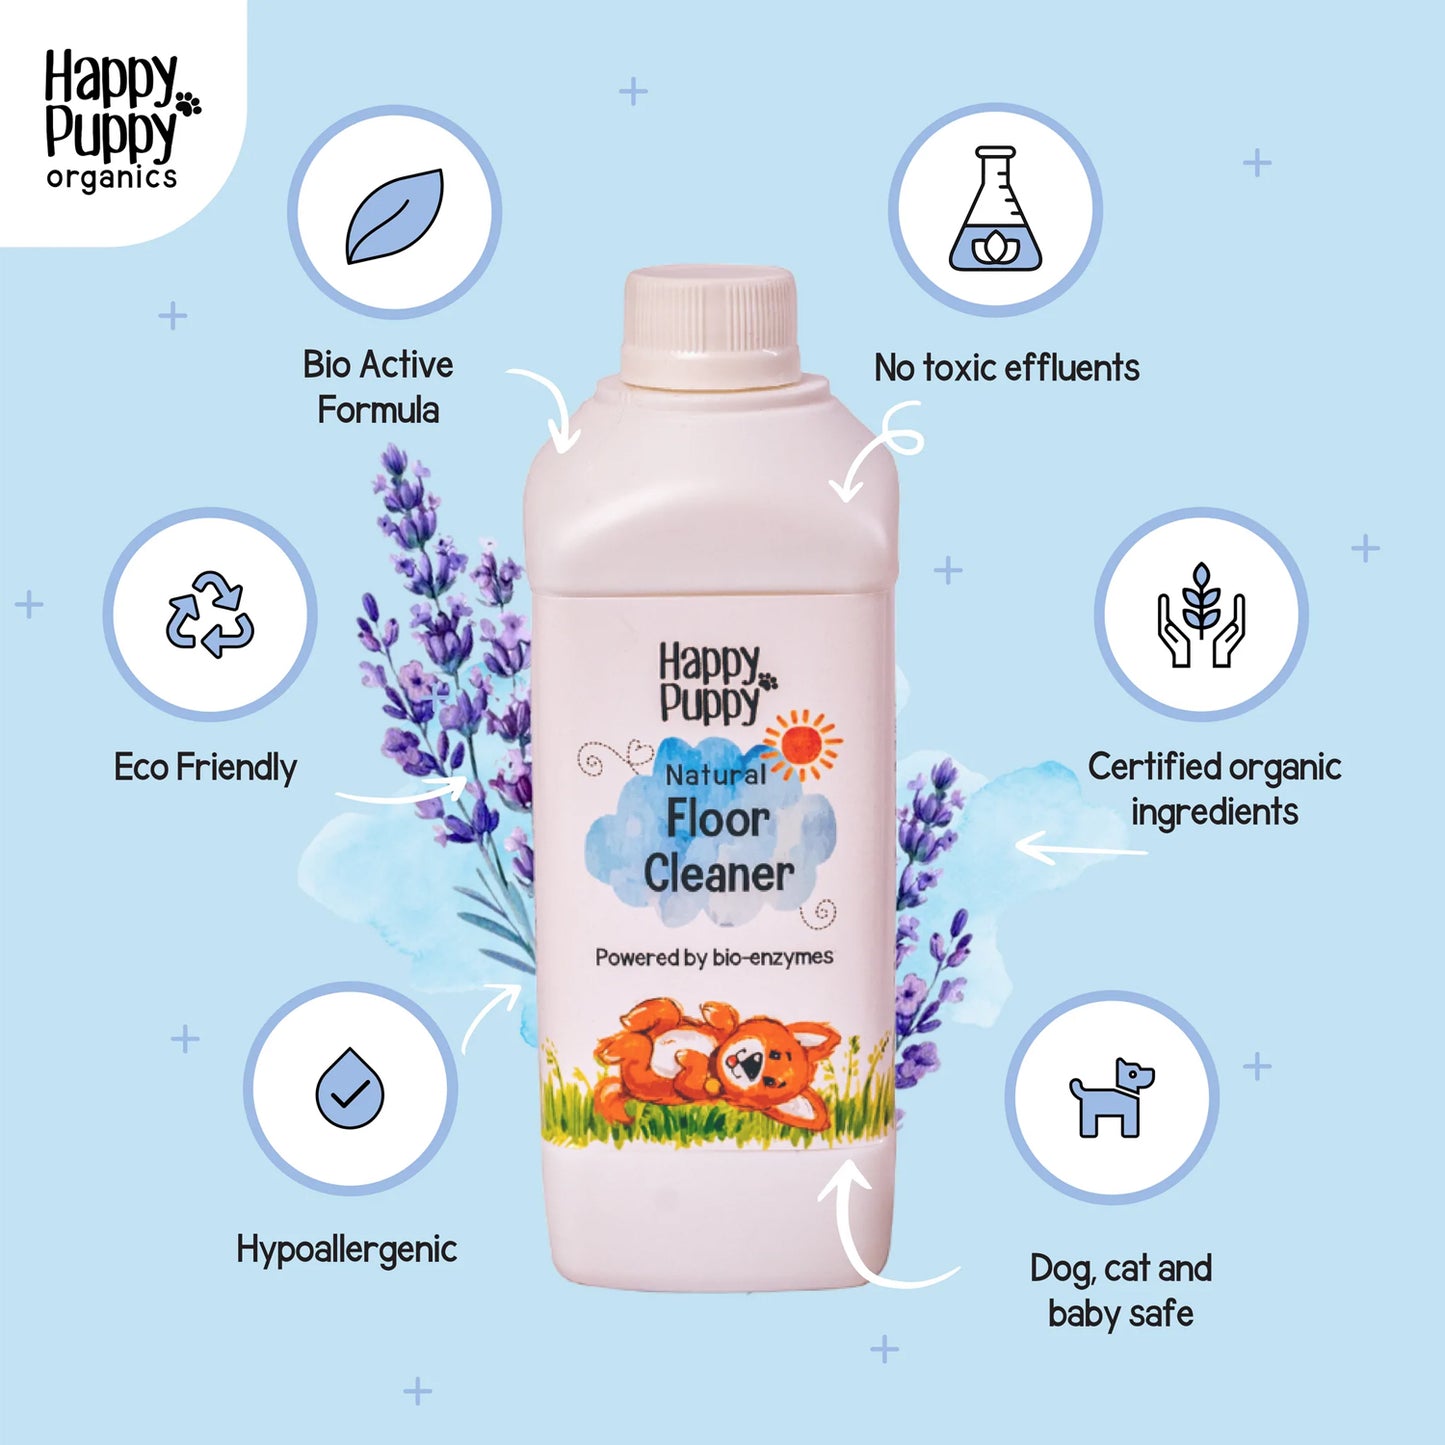 Happy Puppy Organics - Natural Enzymatic Floor Cleaner For Dogs